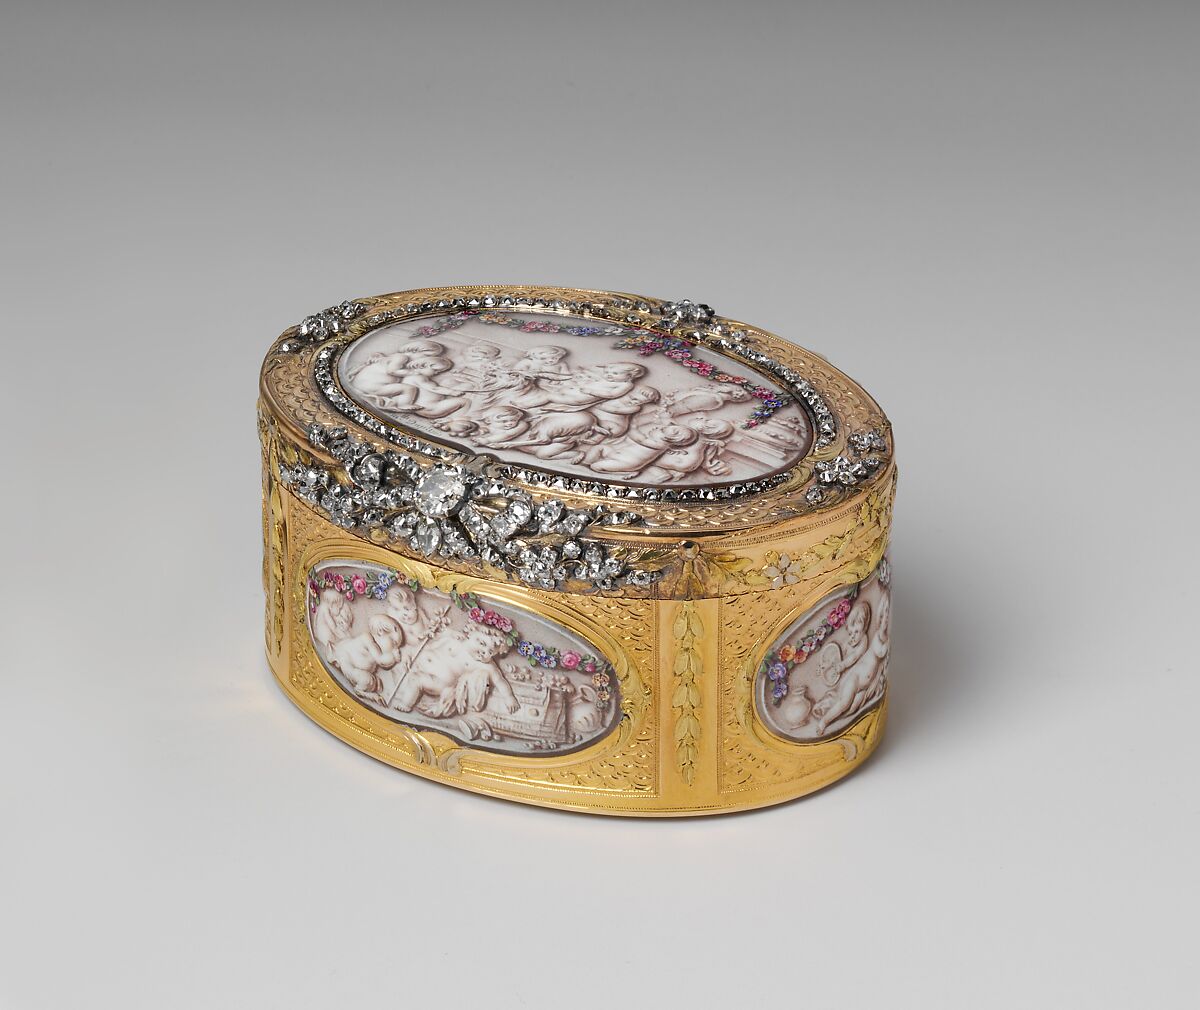 Snuffbox with six scenes of putti at play, Jean Georges (or George) (master 1752, died 1765), Gold, grisaille enamel, diamonds, French, Paris 